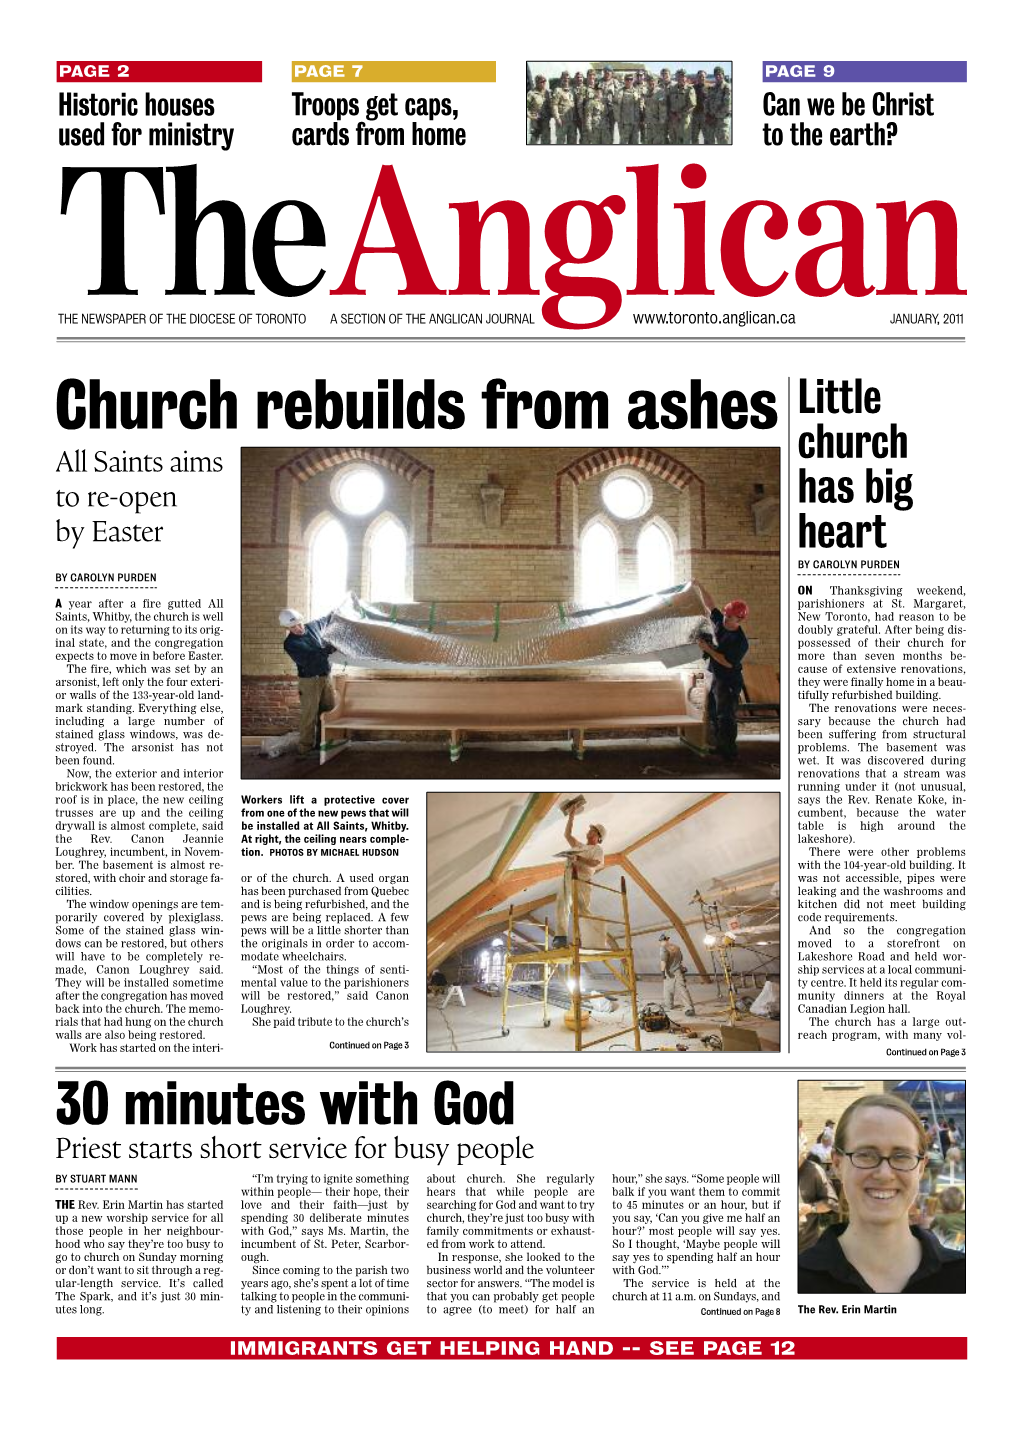 Church Rebuilds from Ashes